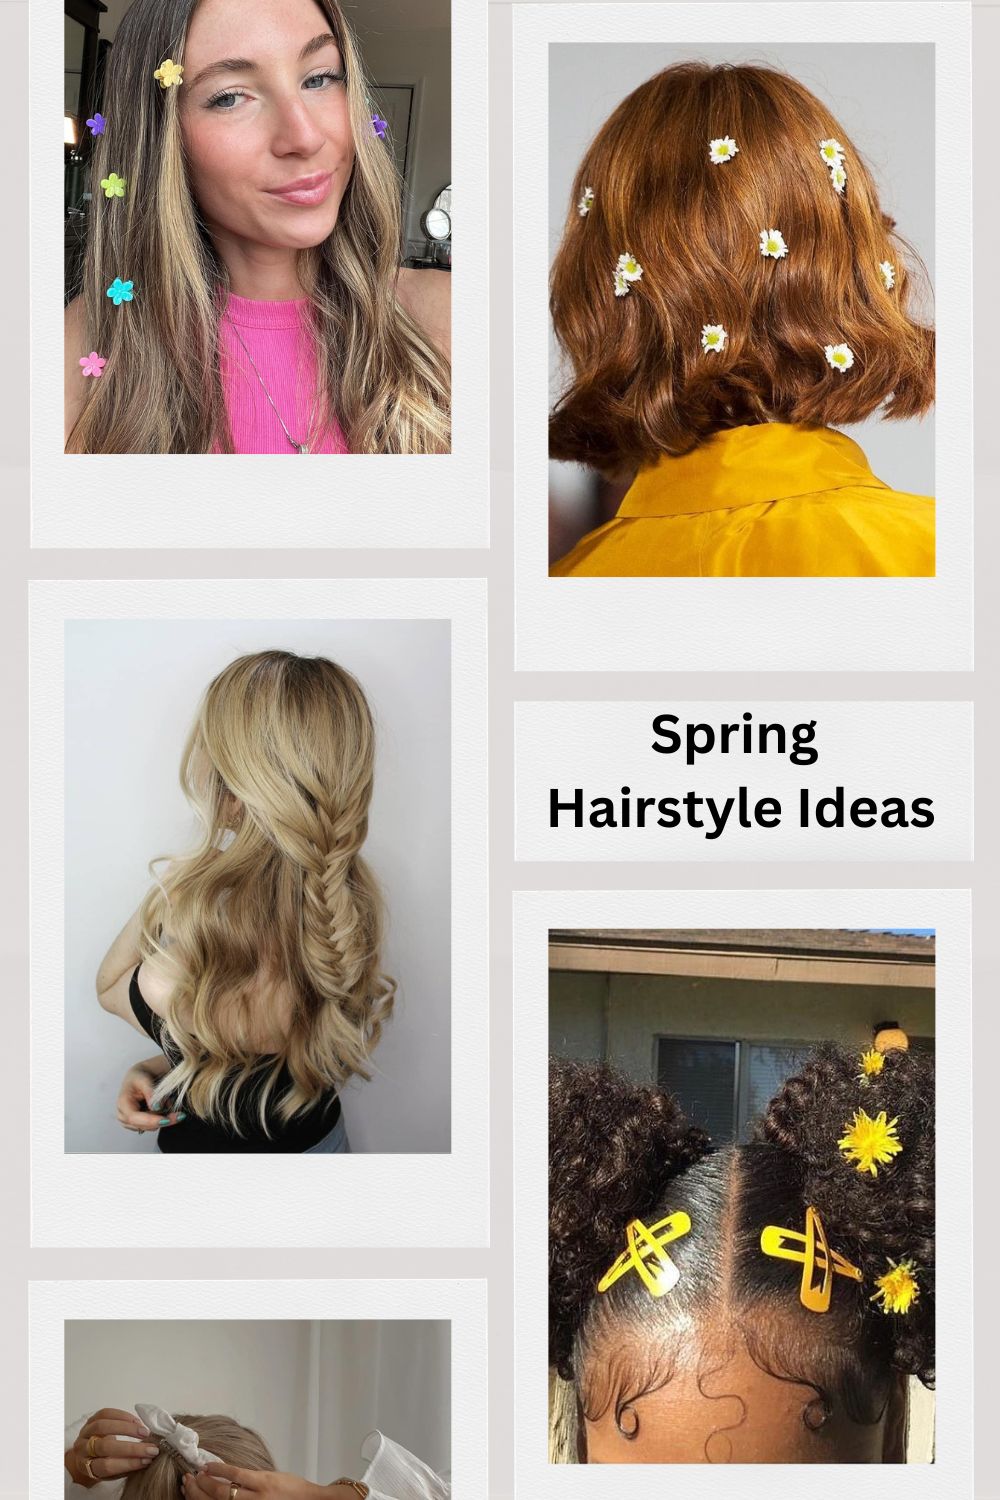 Spring Hairstyle Ideas